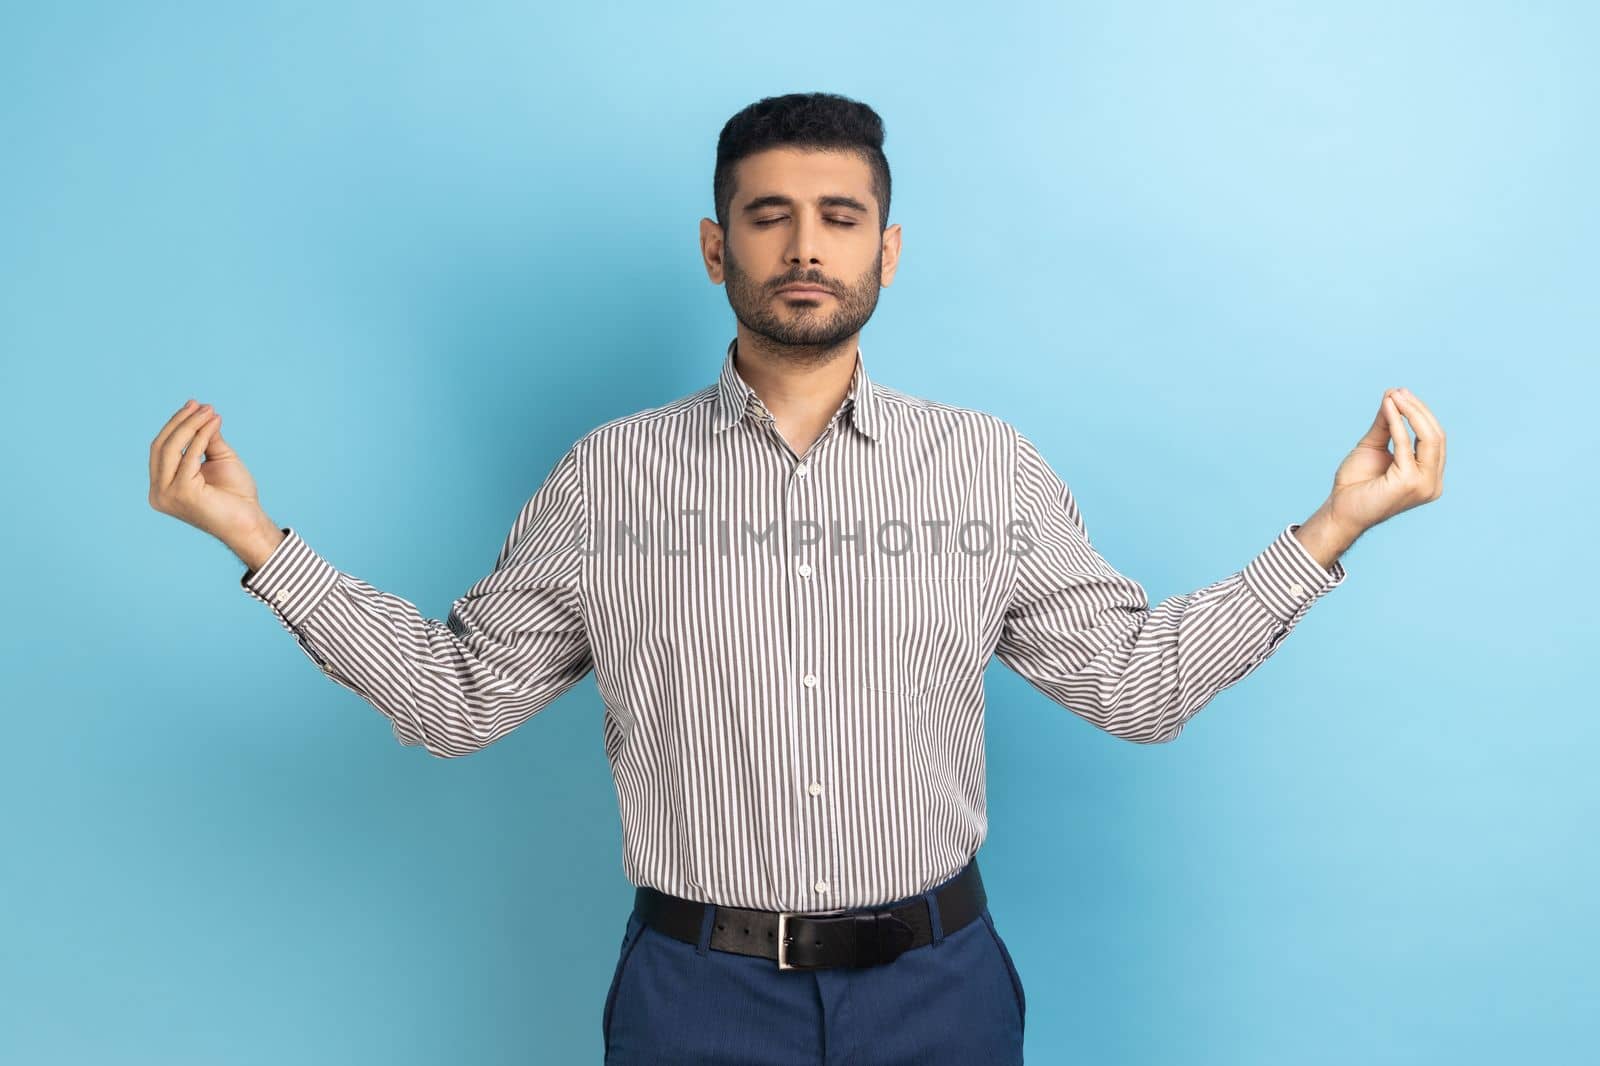 Young businessman with beard standing with raised arms and doing yoga meditating exercise. by Khosro1